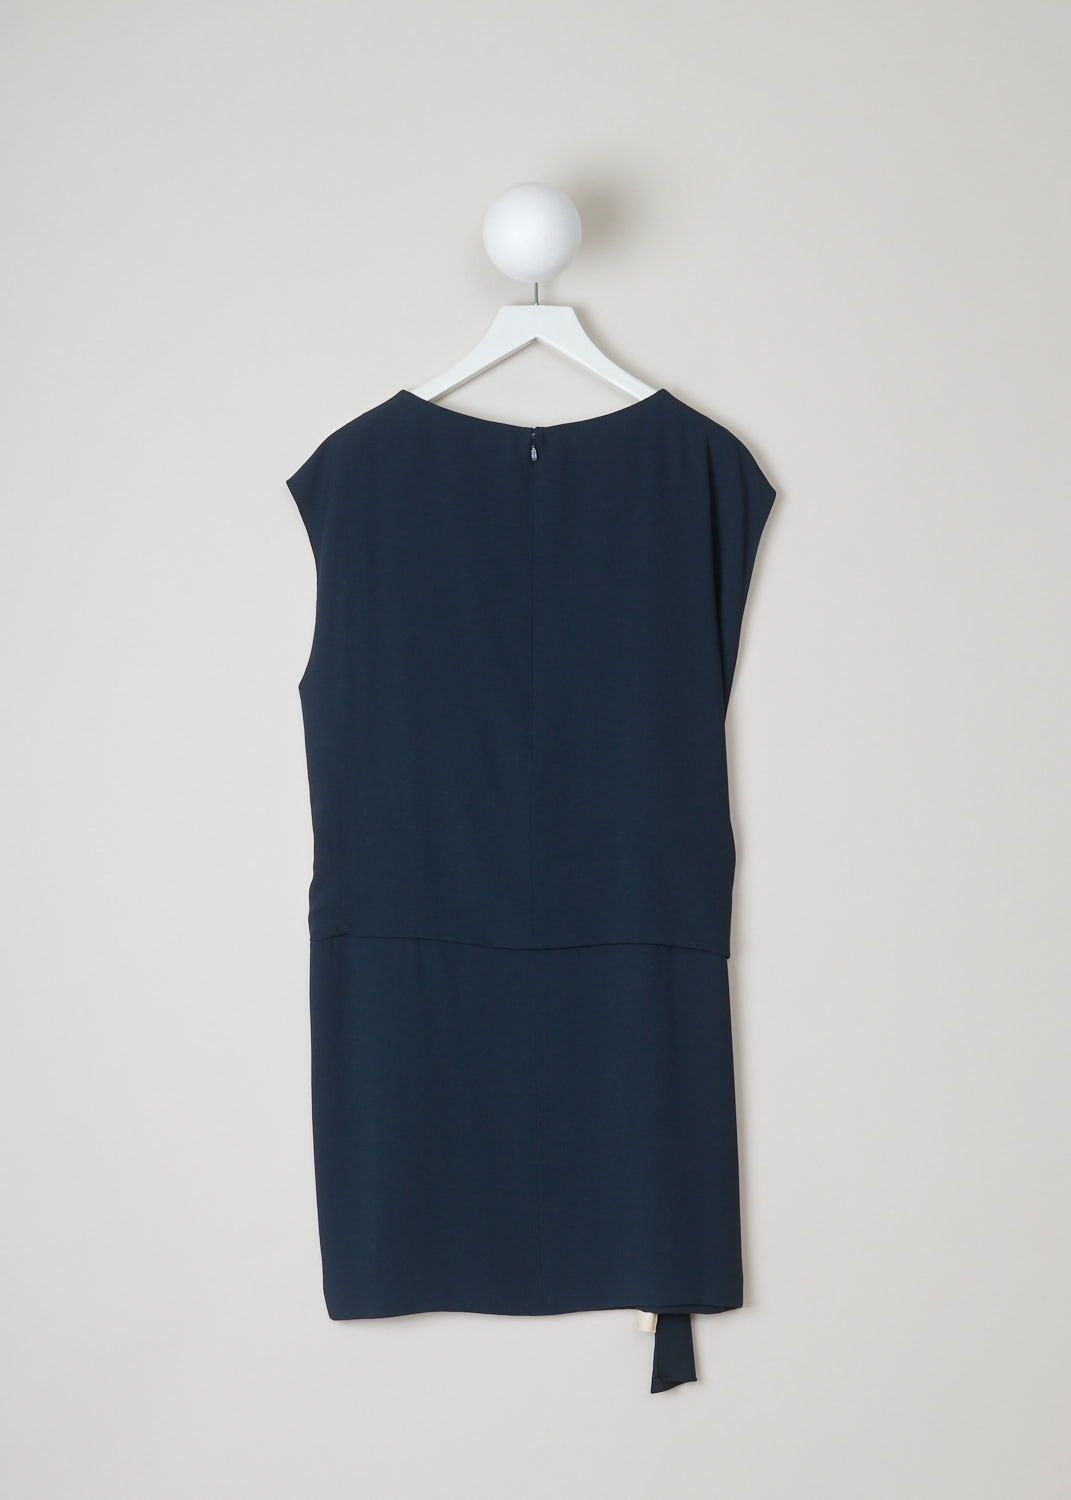 ChloÃ©, Dropped waist dress in beige and blue, 15SRO18_15S238_1Z7_black_navy_vanilla, blue beige, back. Dropped waist dress, sharing some similarities with a wrap dress. The blue and beige wrap ribbon can be tied into various knots. Furthermore, this sleeveless model has a round neckline and a concealed zipper with a metal clip on the back. 